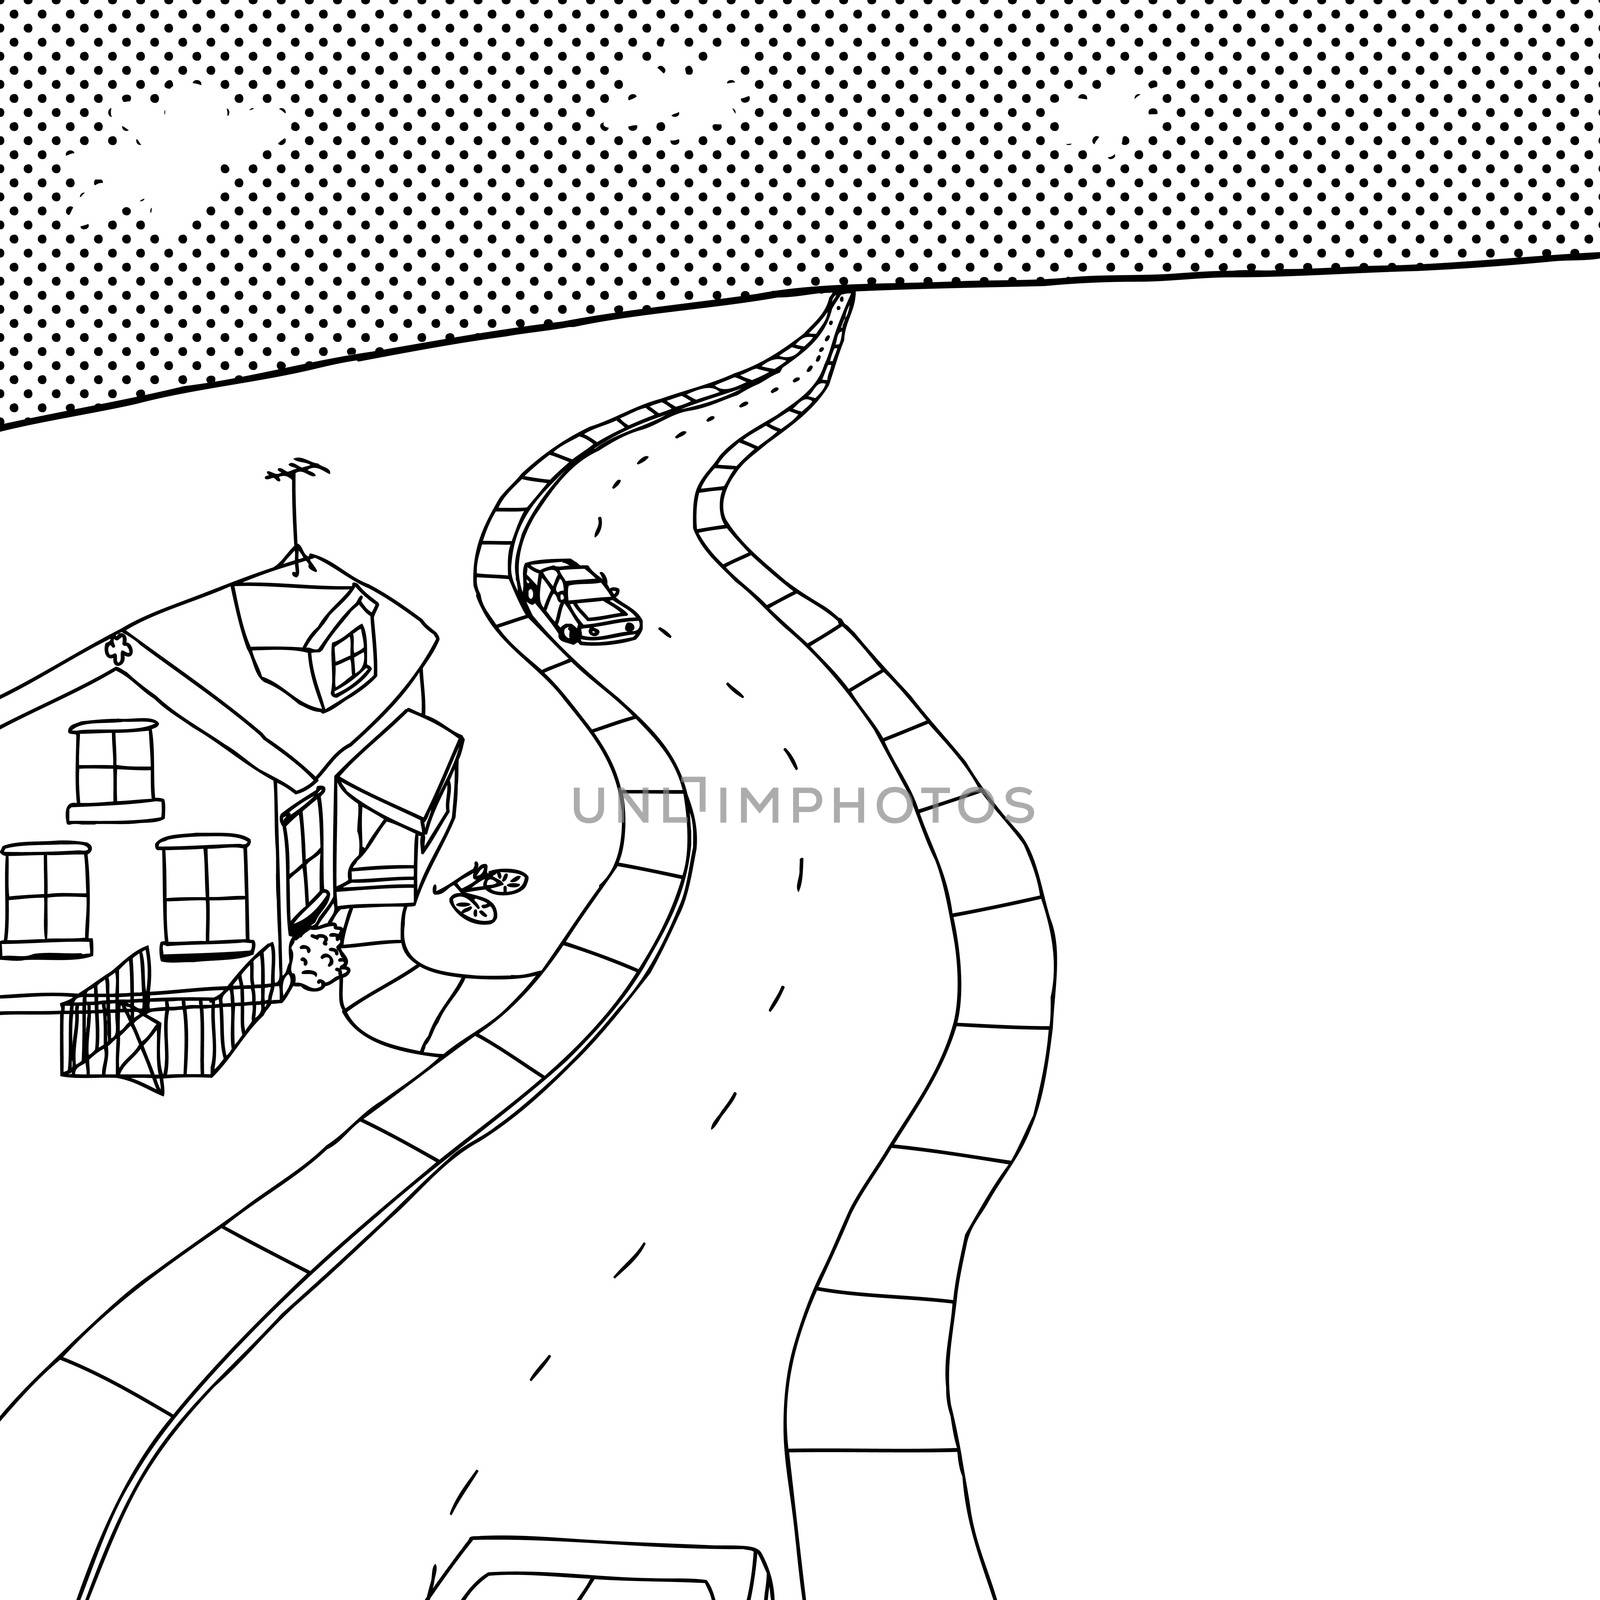 Outline cartoon of street with little house and cars